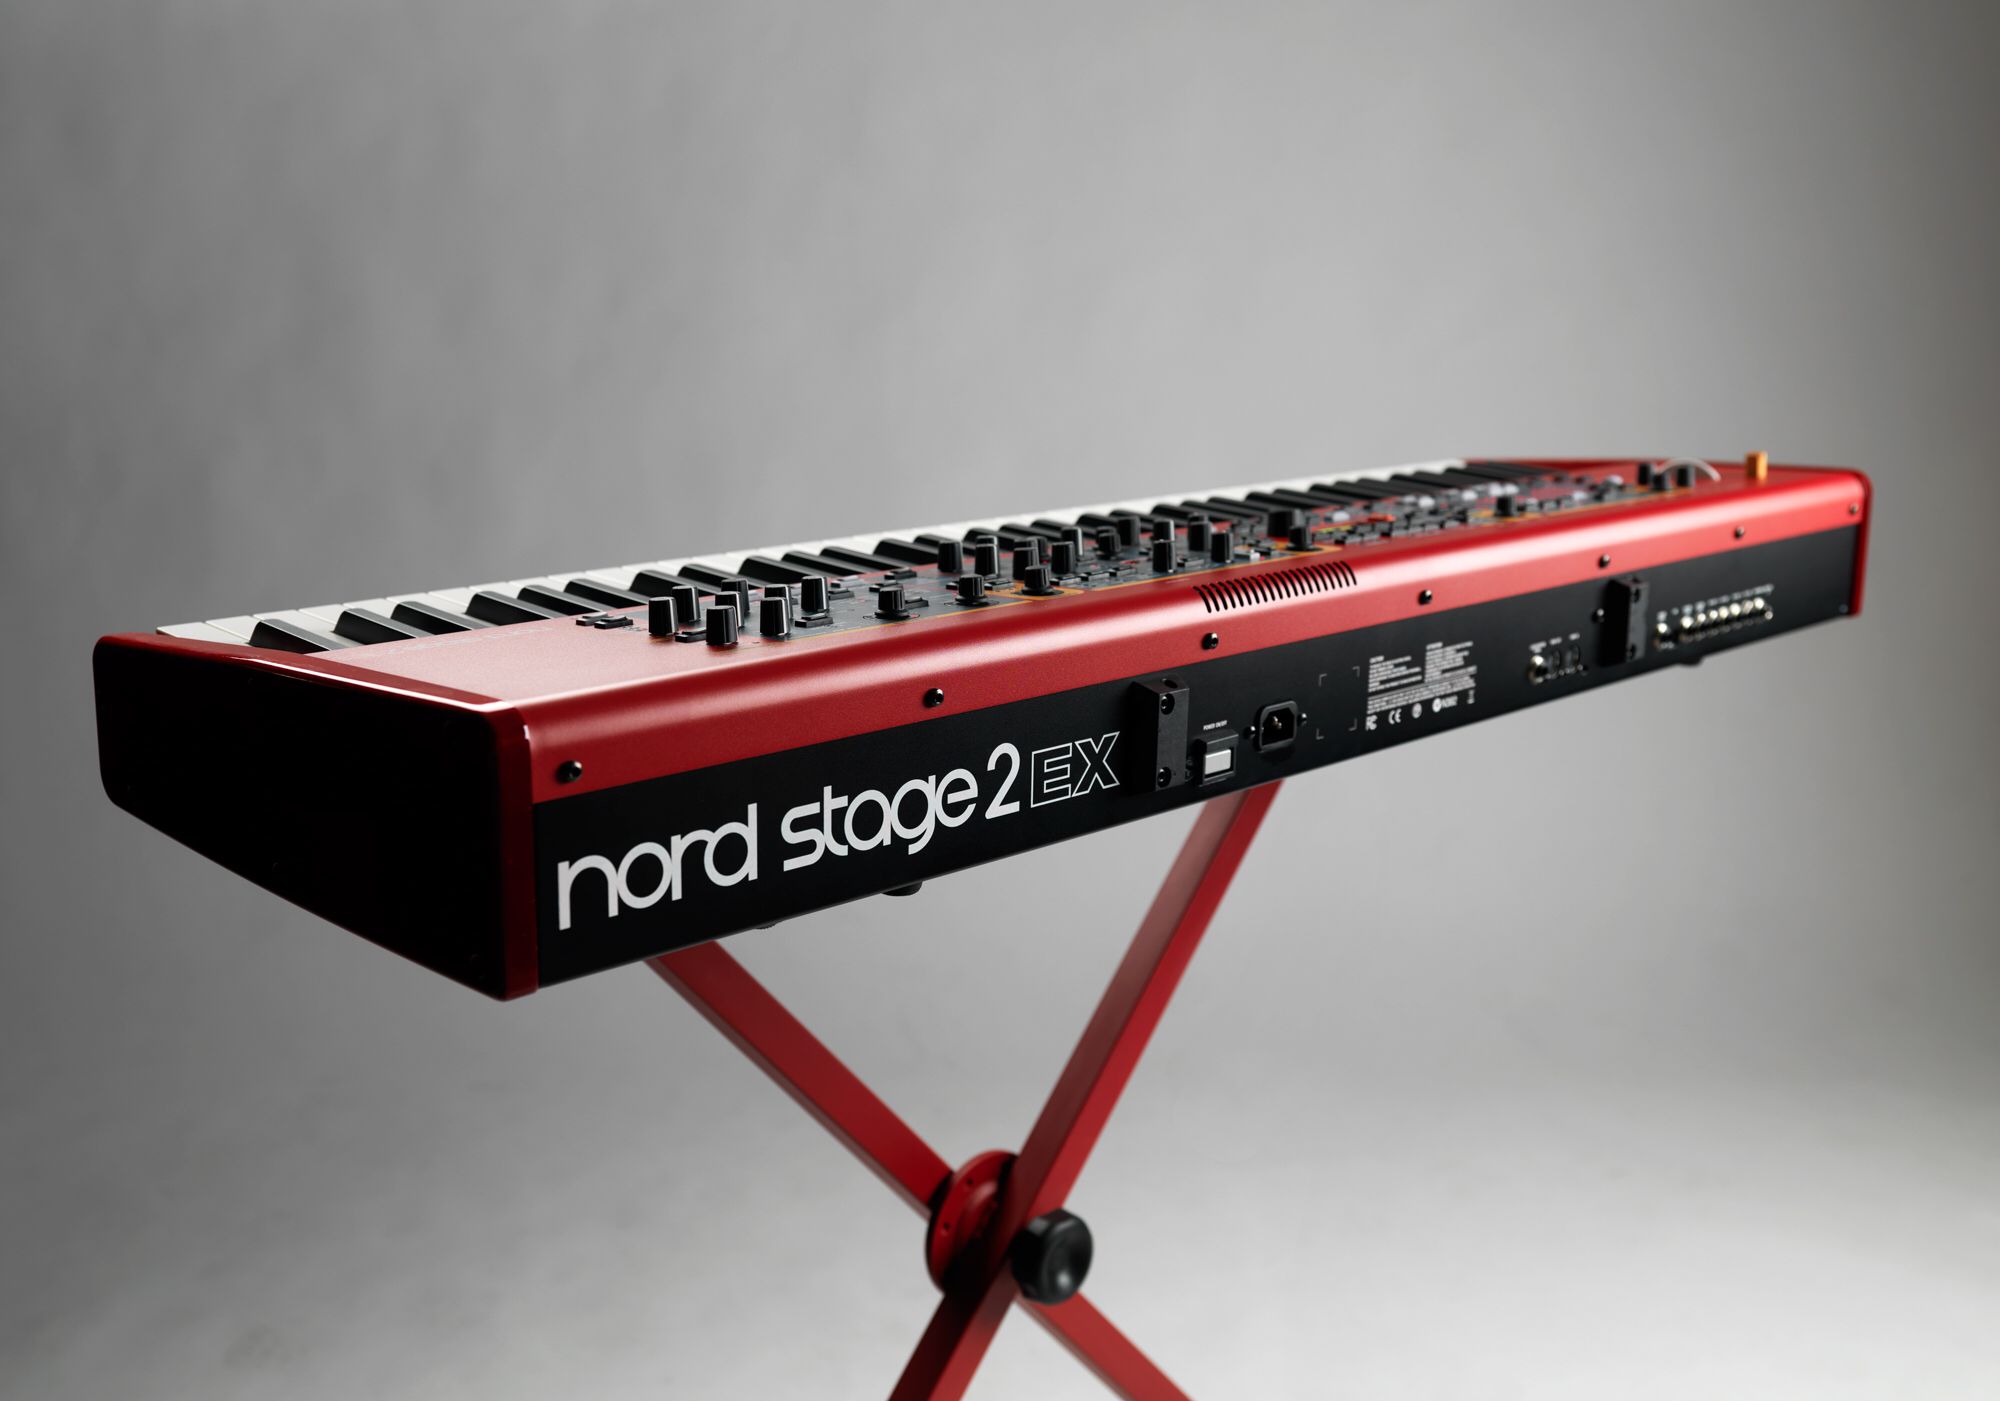 Стейдж 2 3. Clavia Nord Stage 2. Синтезатор Nord Stage 2. Clavia Nord Stage 2 ex 88. Clavia Nord Stage 2 ex Compact.